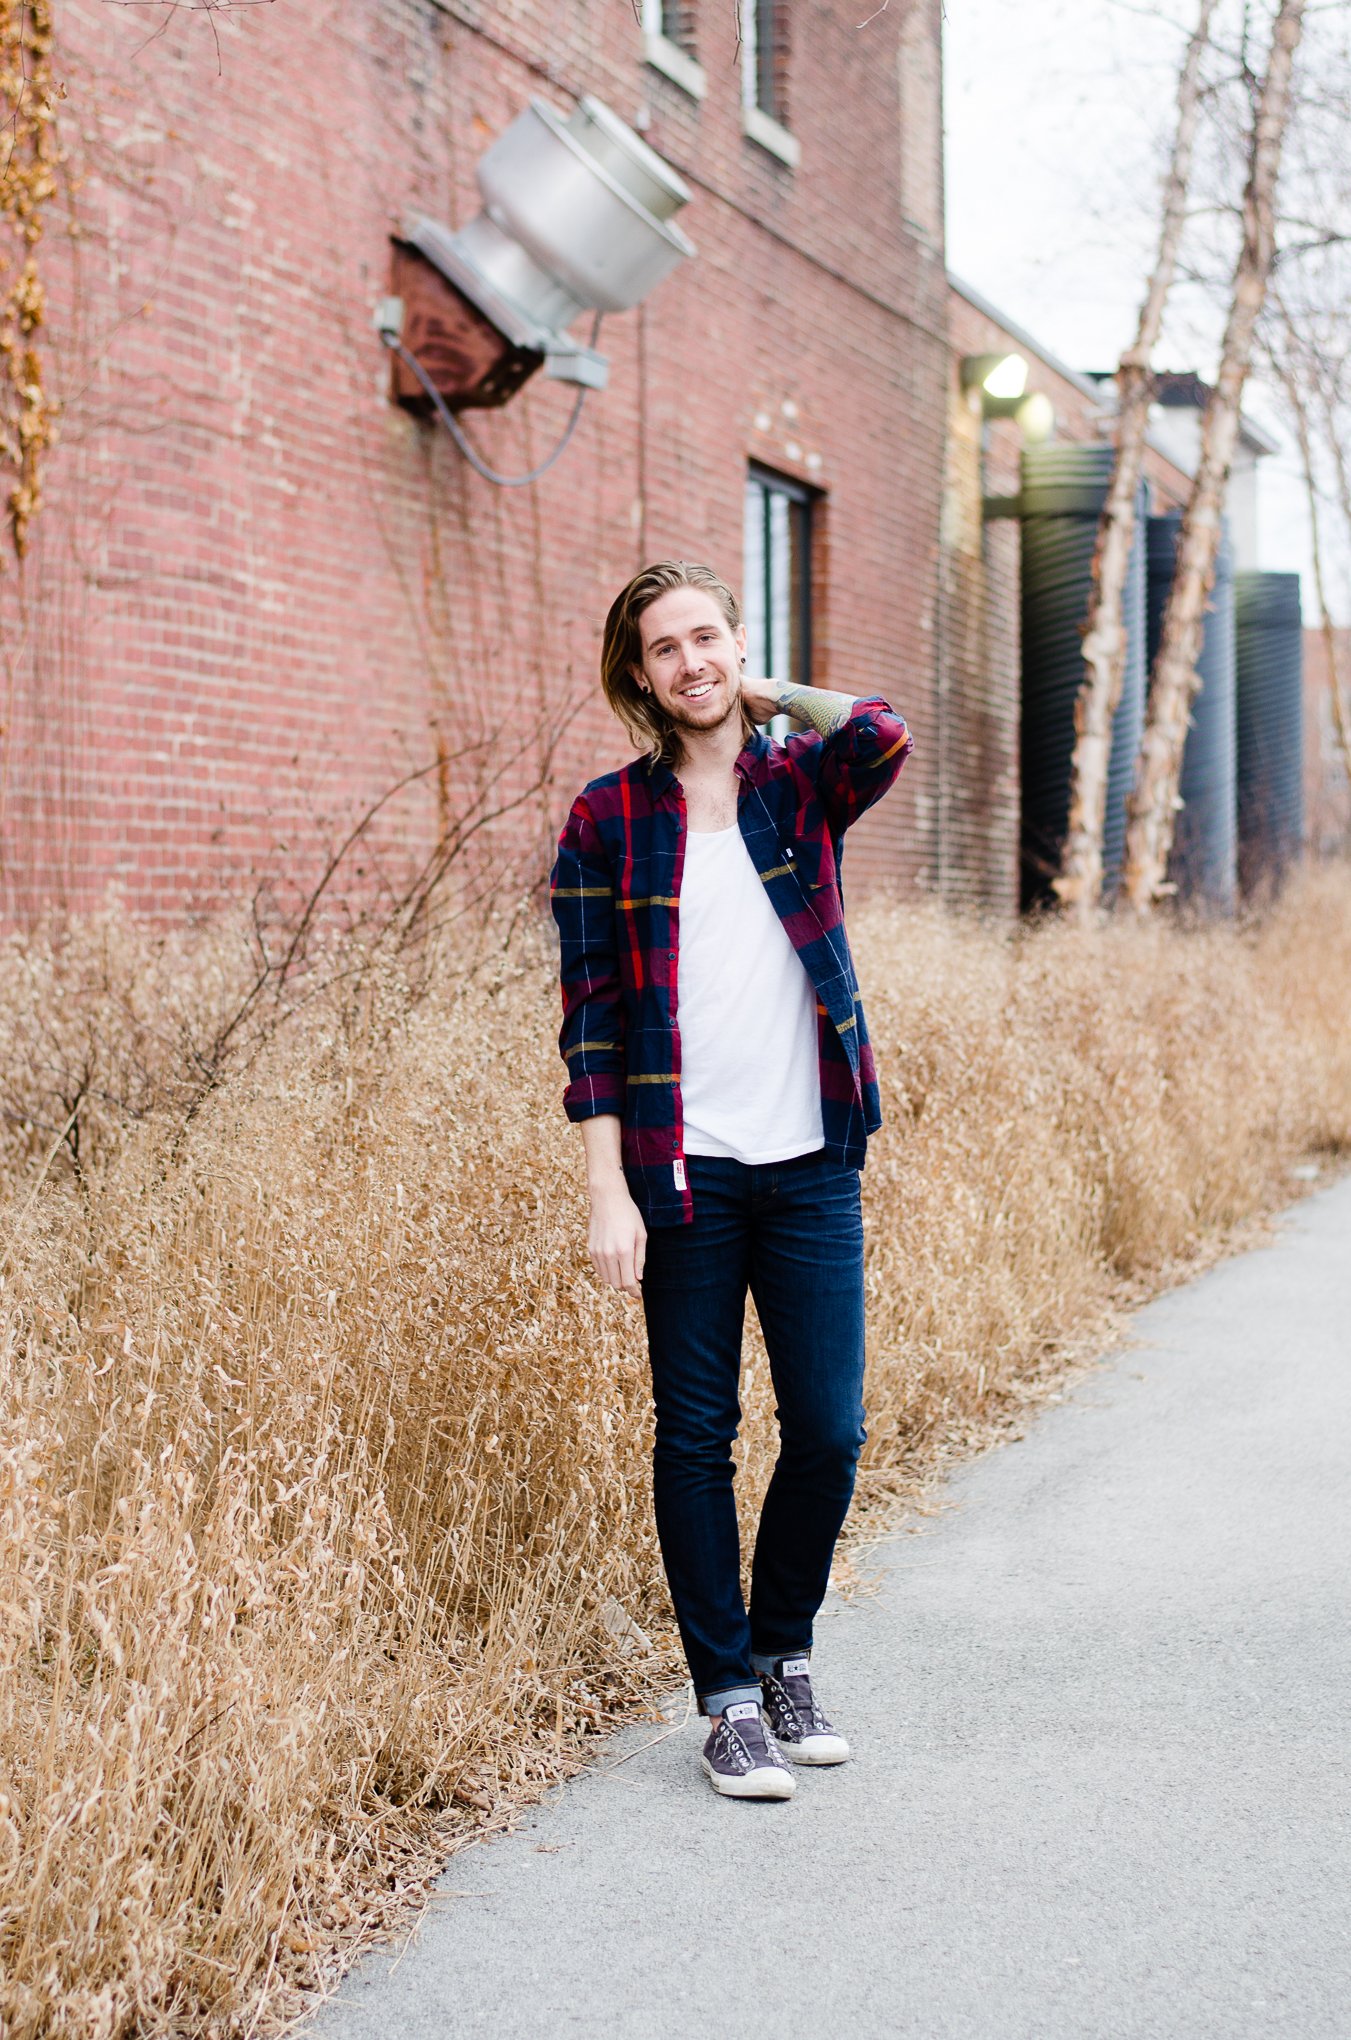 The Kentucky Gent, a men's fashion and lifestyle blogger, dishes on a picture perfect life. 